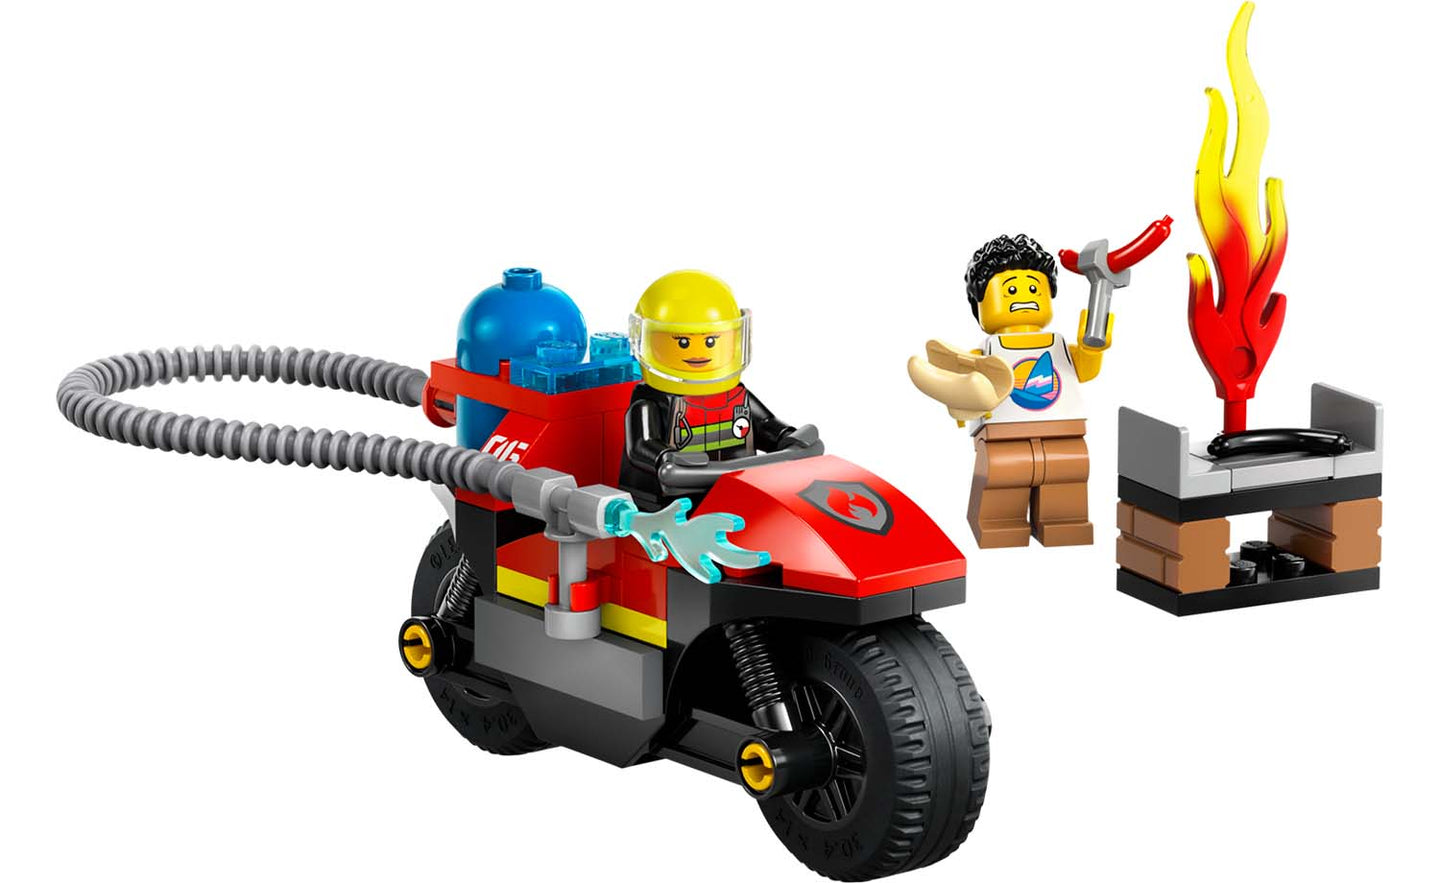 60410 | LEGO® City Fire Rescue Motorcycle